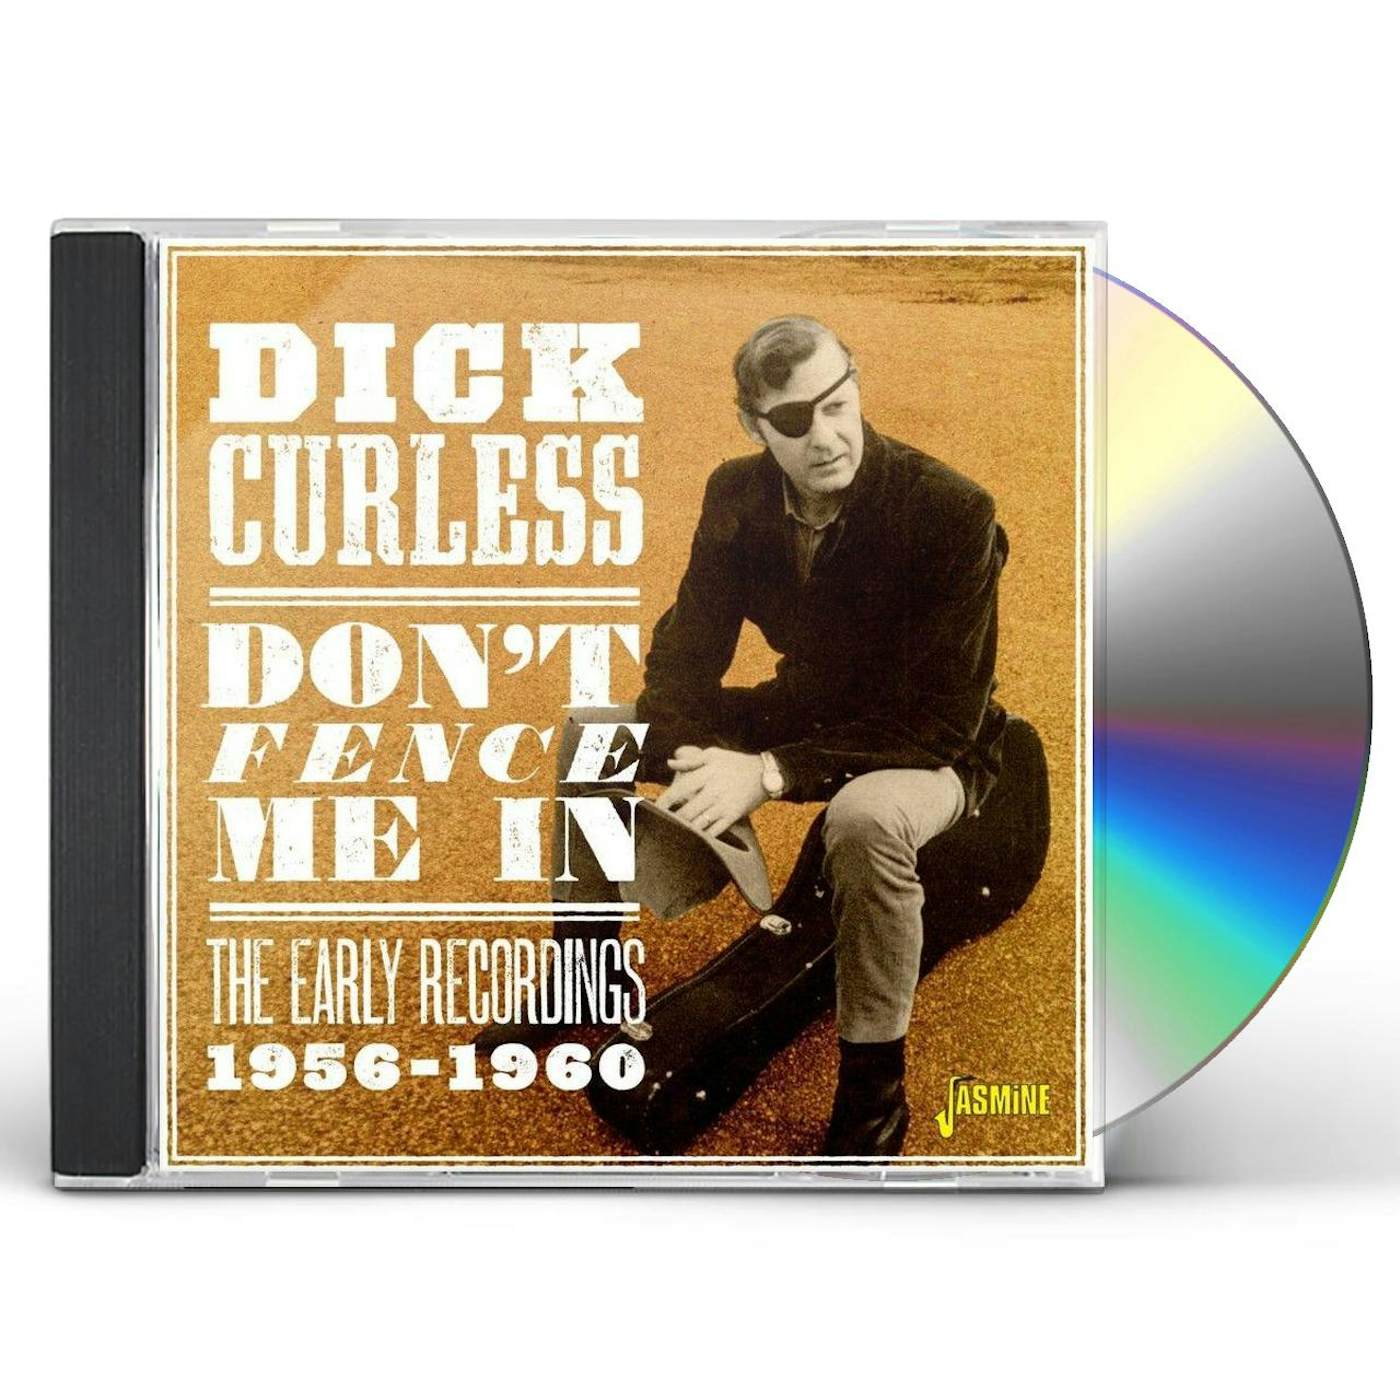 Dick Curless DON'T FENCE ME IN: THE EARLY RECORDINGS 1956-1960 CD